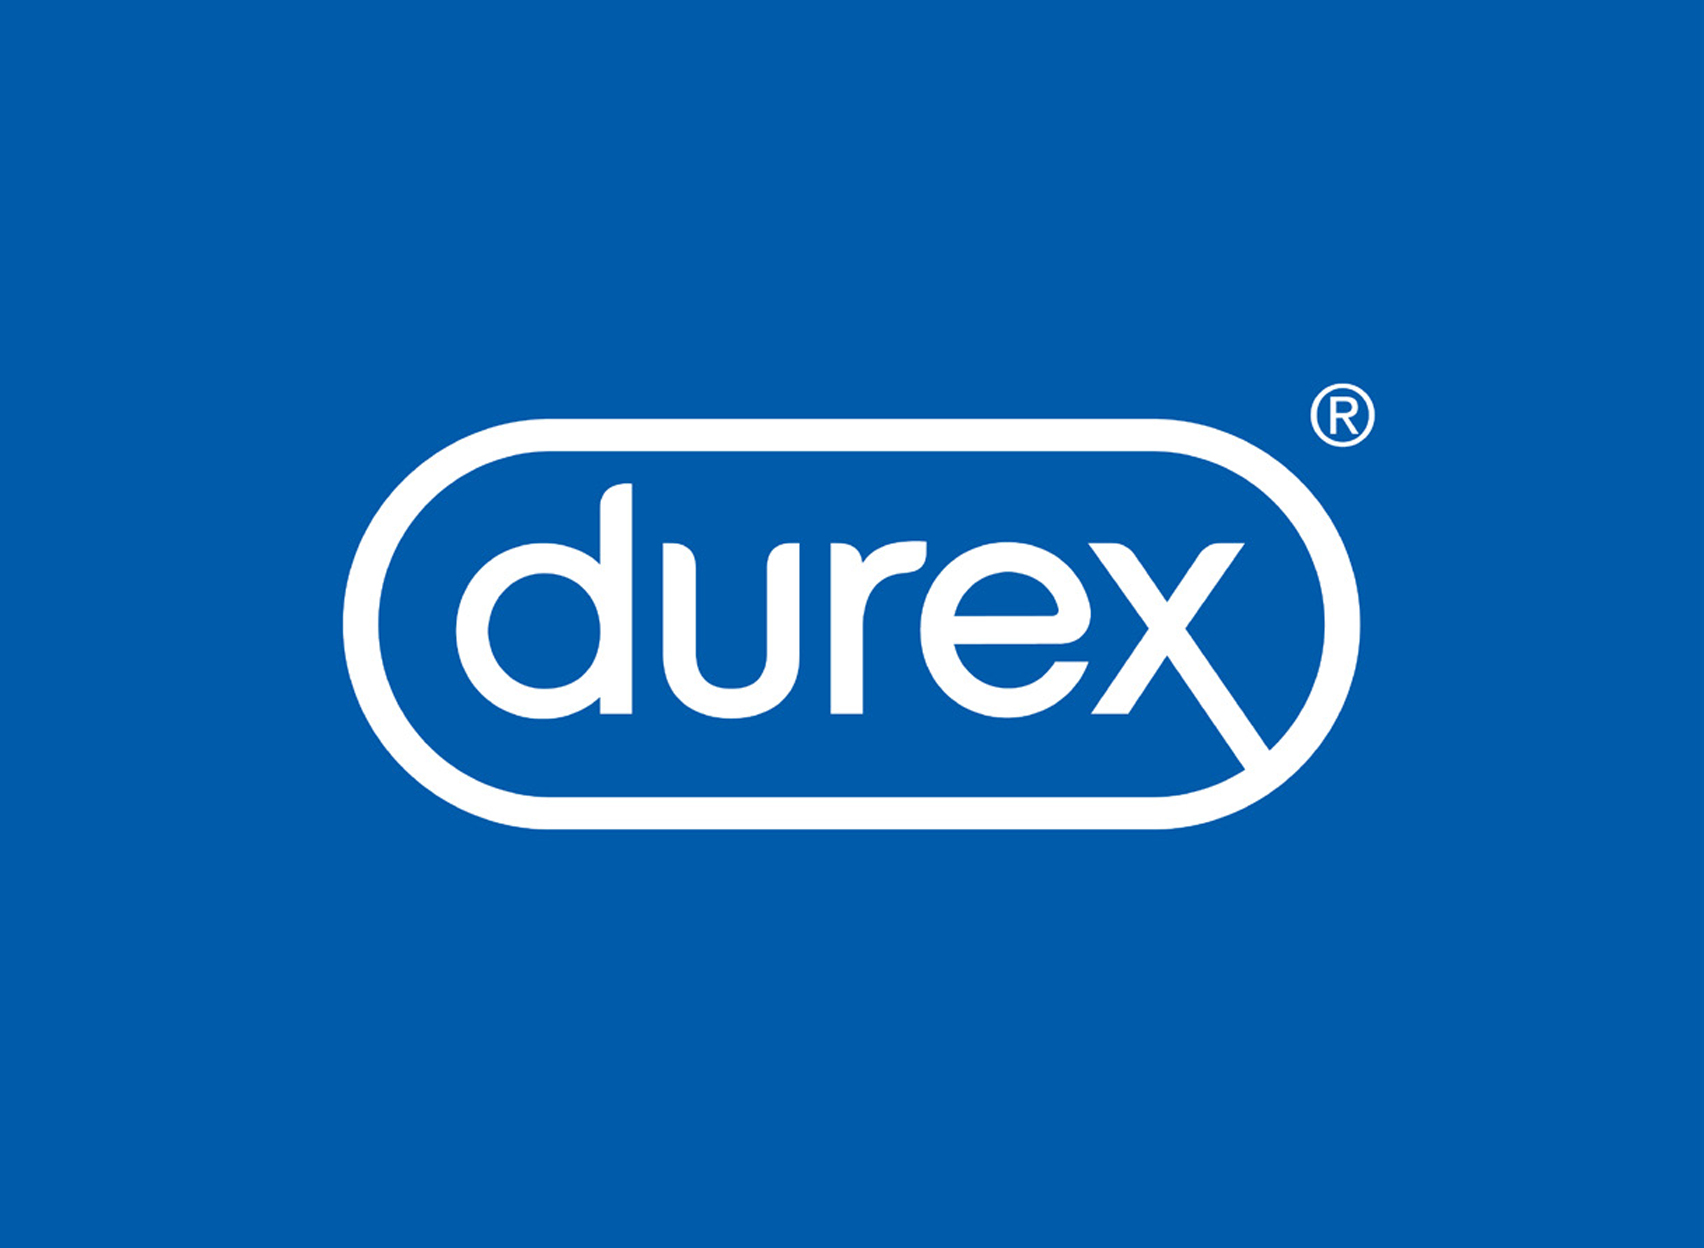 Durex Rebrands With Flat Logo And Sex Positive Campaign Brandknewmag Actionable Intelligence